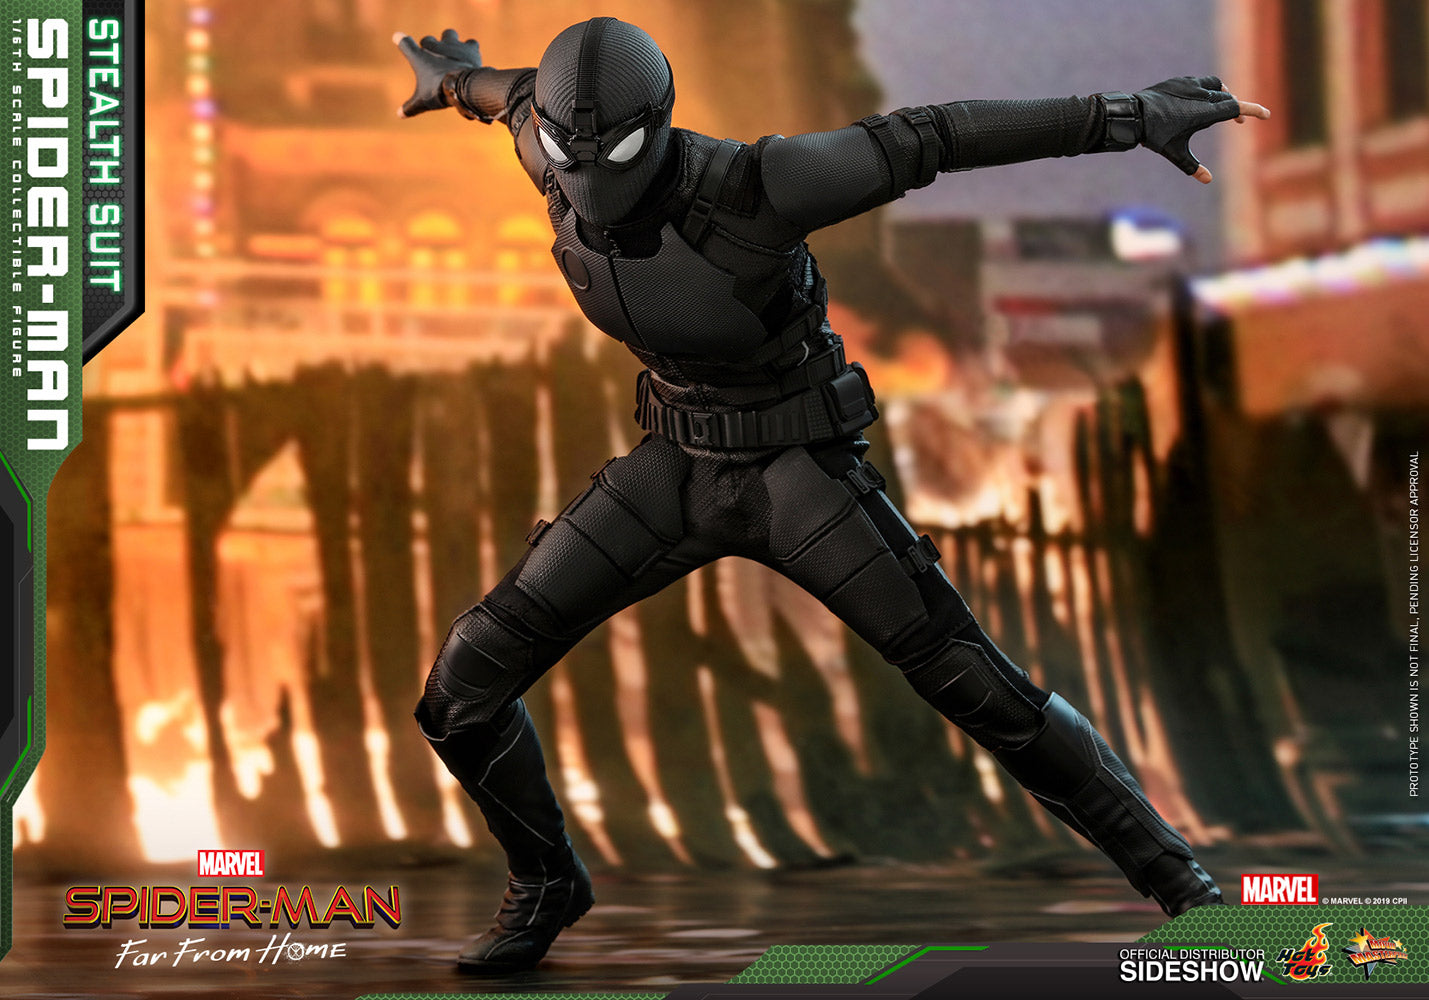 Spider-man (Stealth Suit) - Spider-man: Far From Home - Sixth Scale Figure by Hot Toys